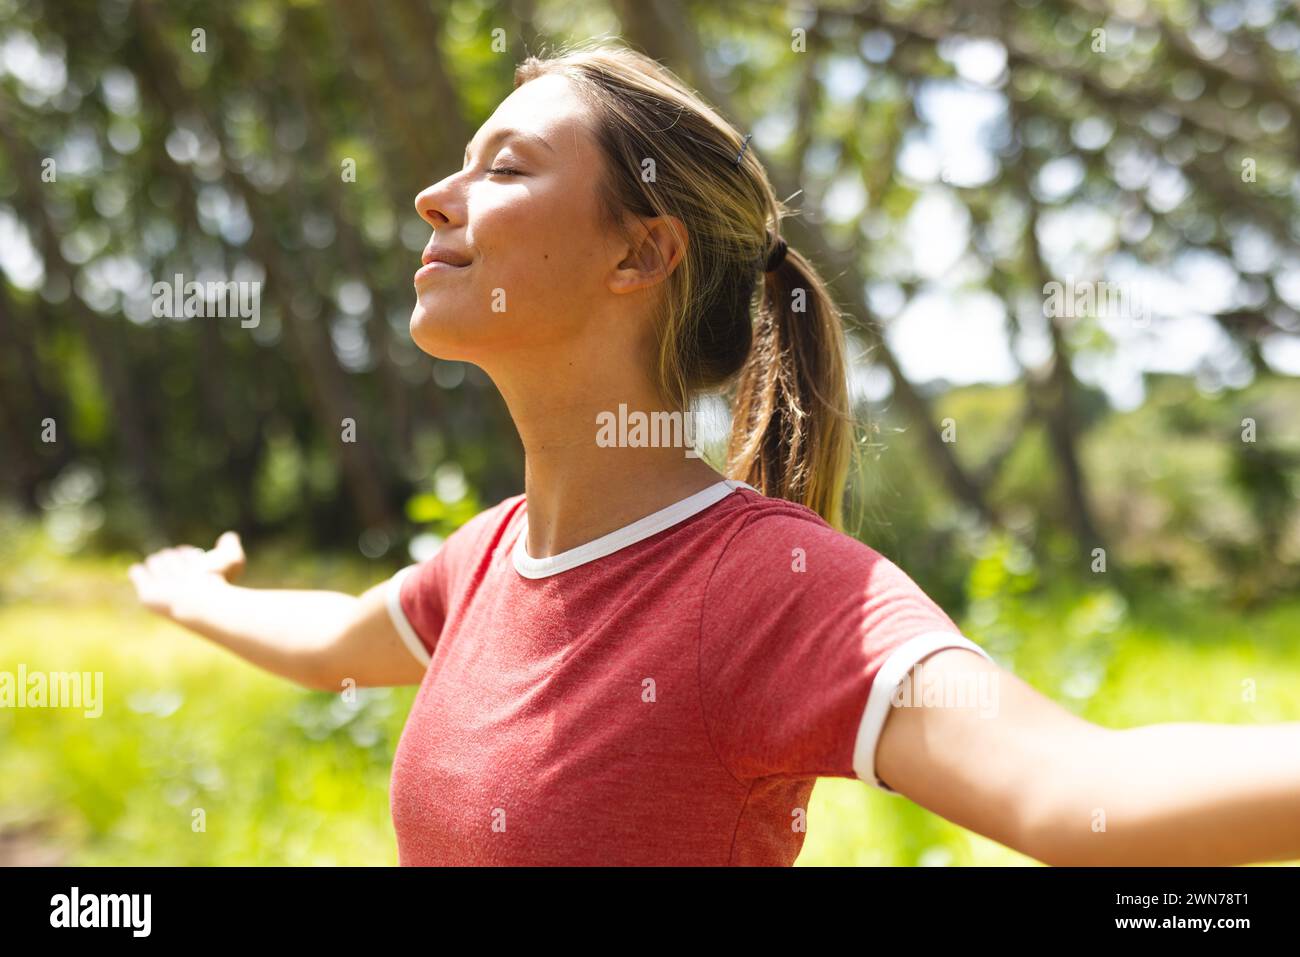 Young woman with her arms outstretched enjoys the sun in a green park Stock Photo